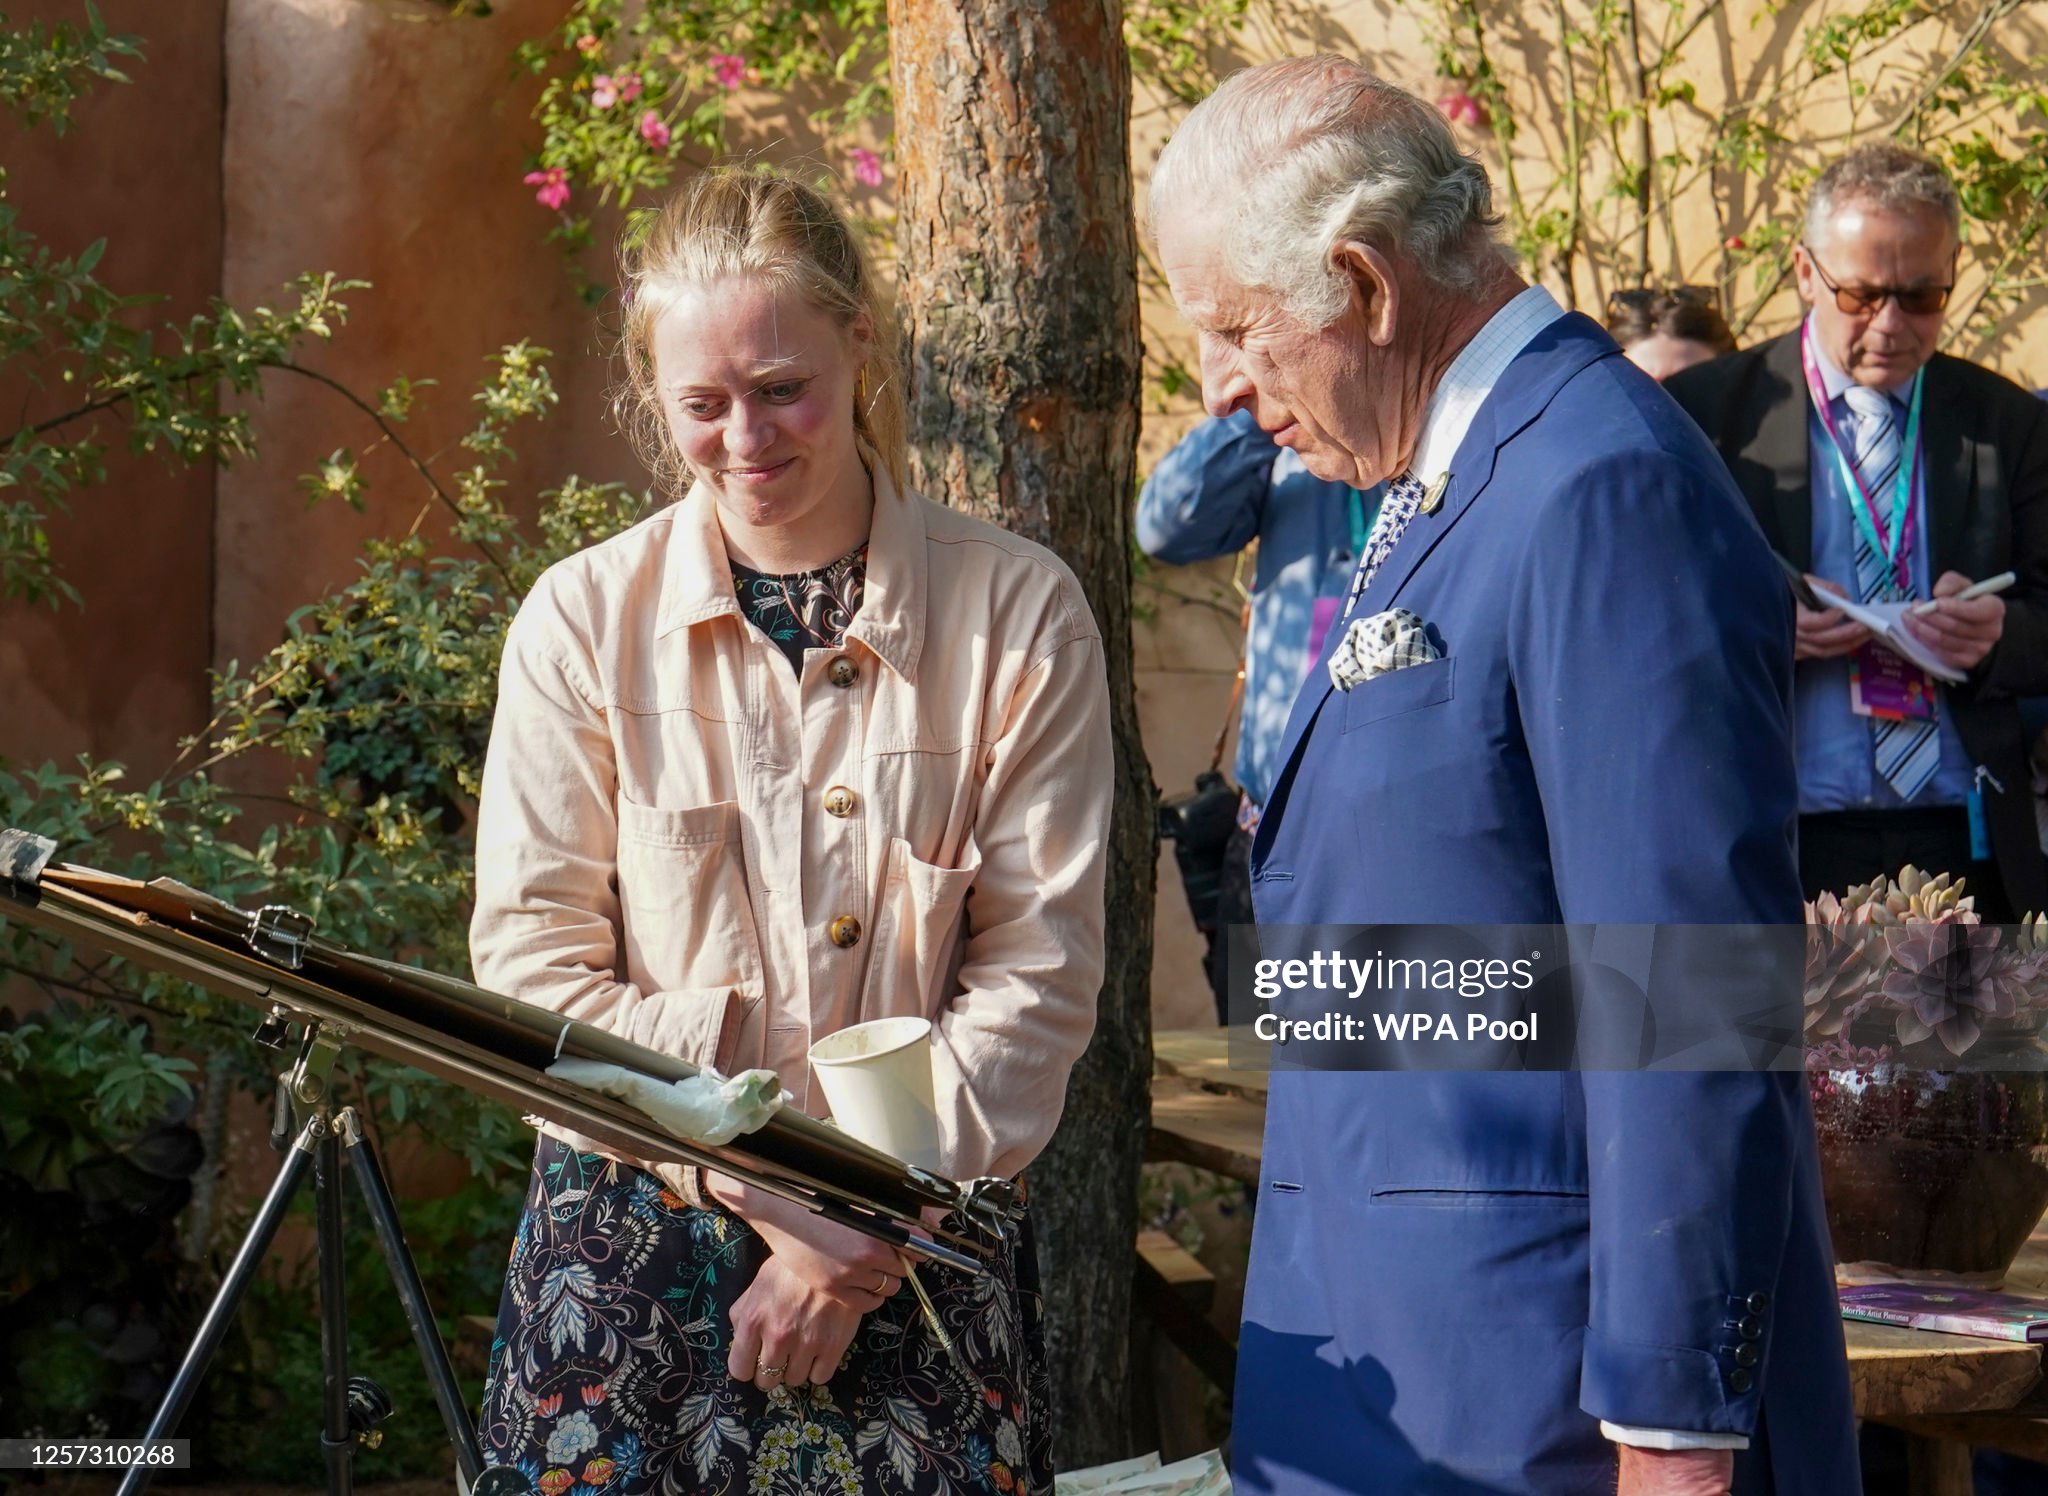 britains-king-charles-iii-with-artist-beatrice-hasell-mccosh-at-the-nature-landscape-garden.jpg